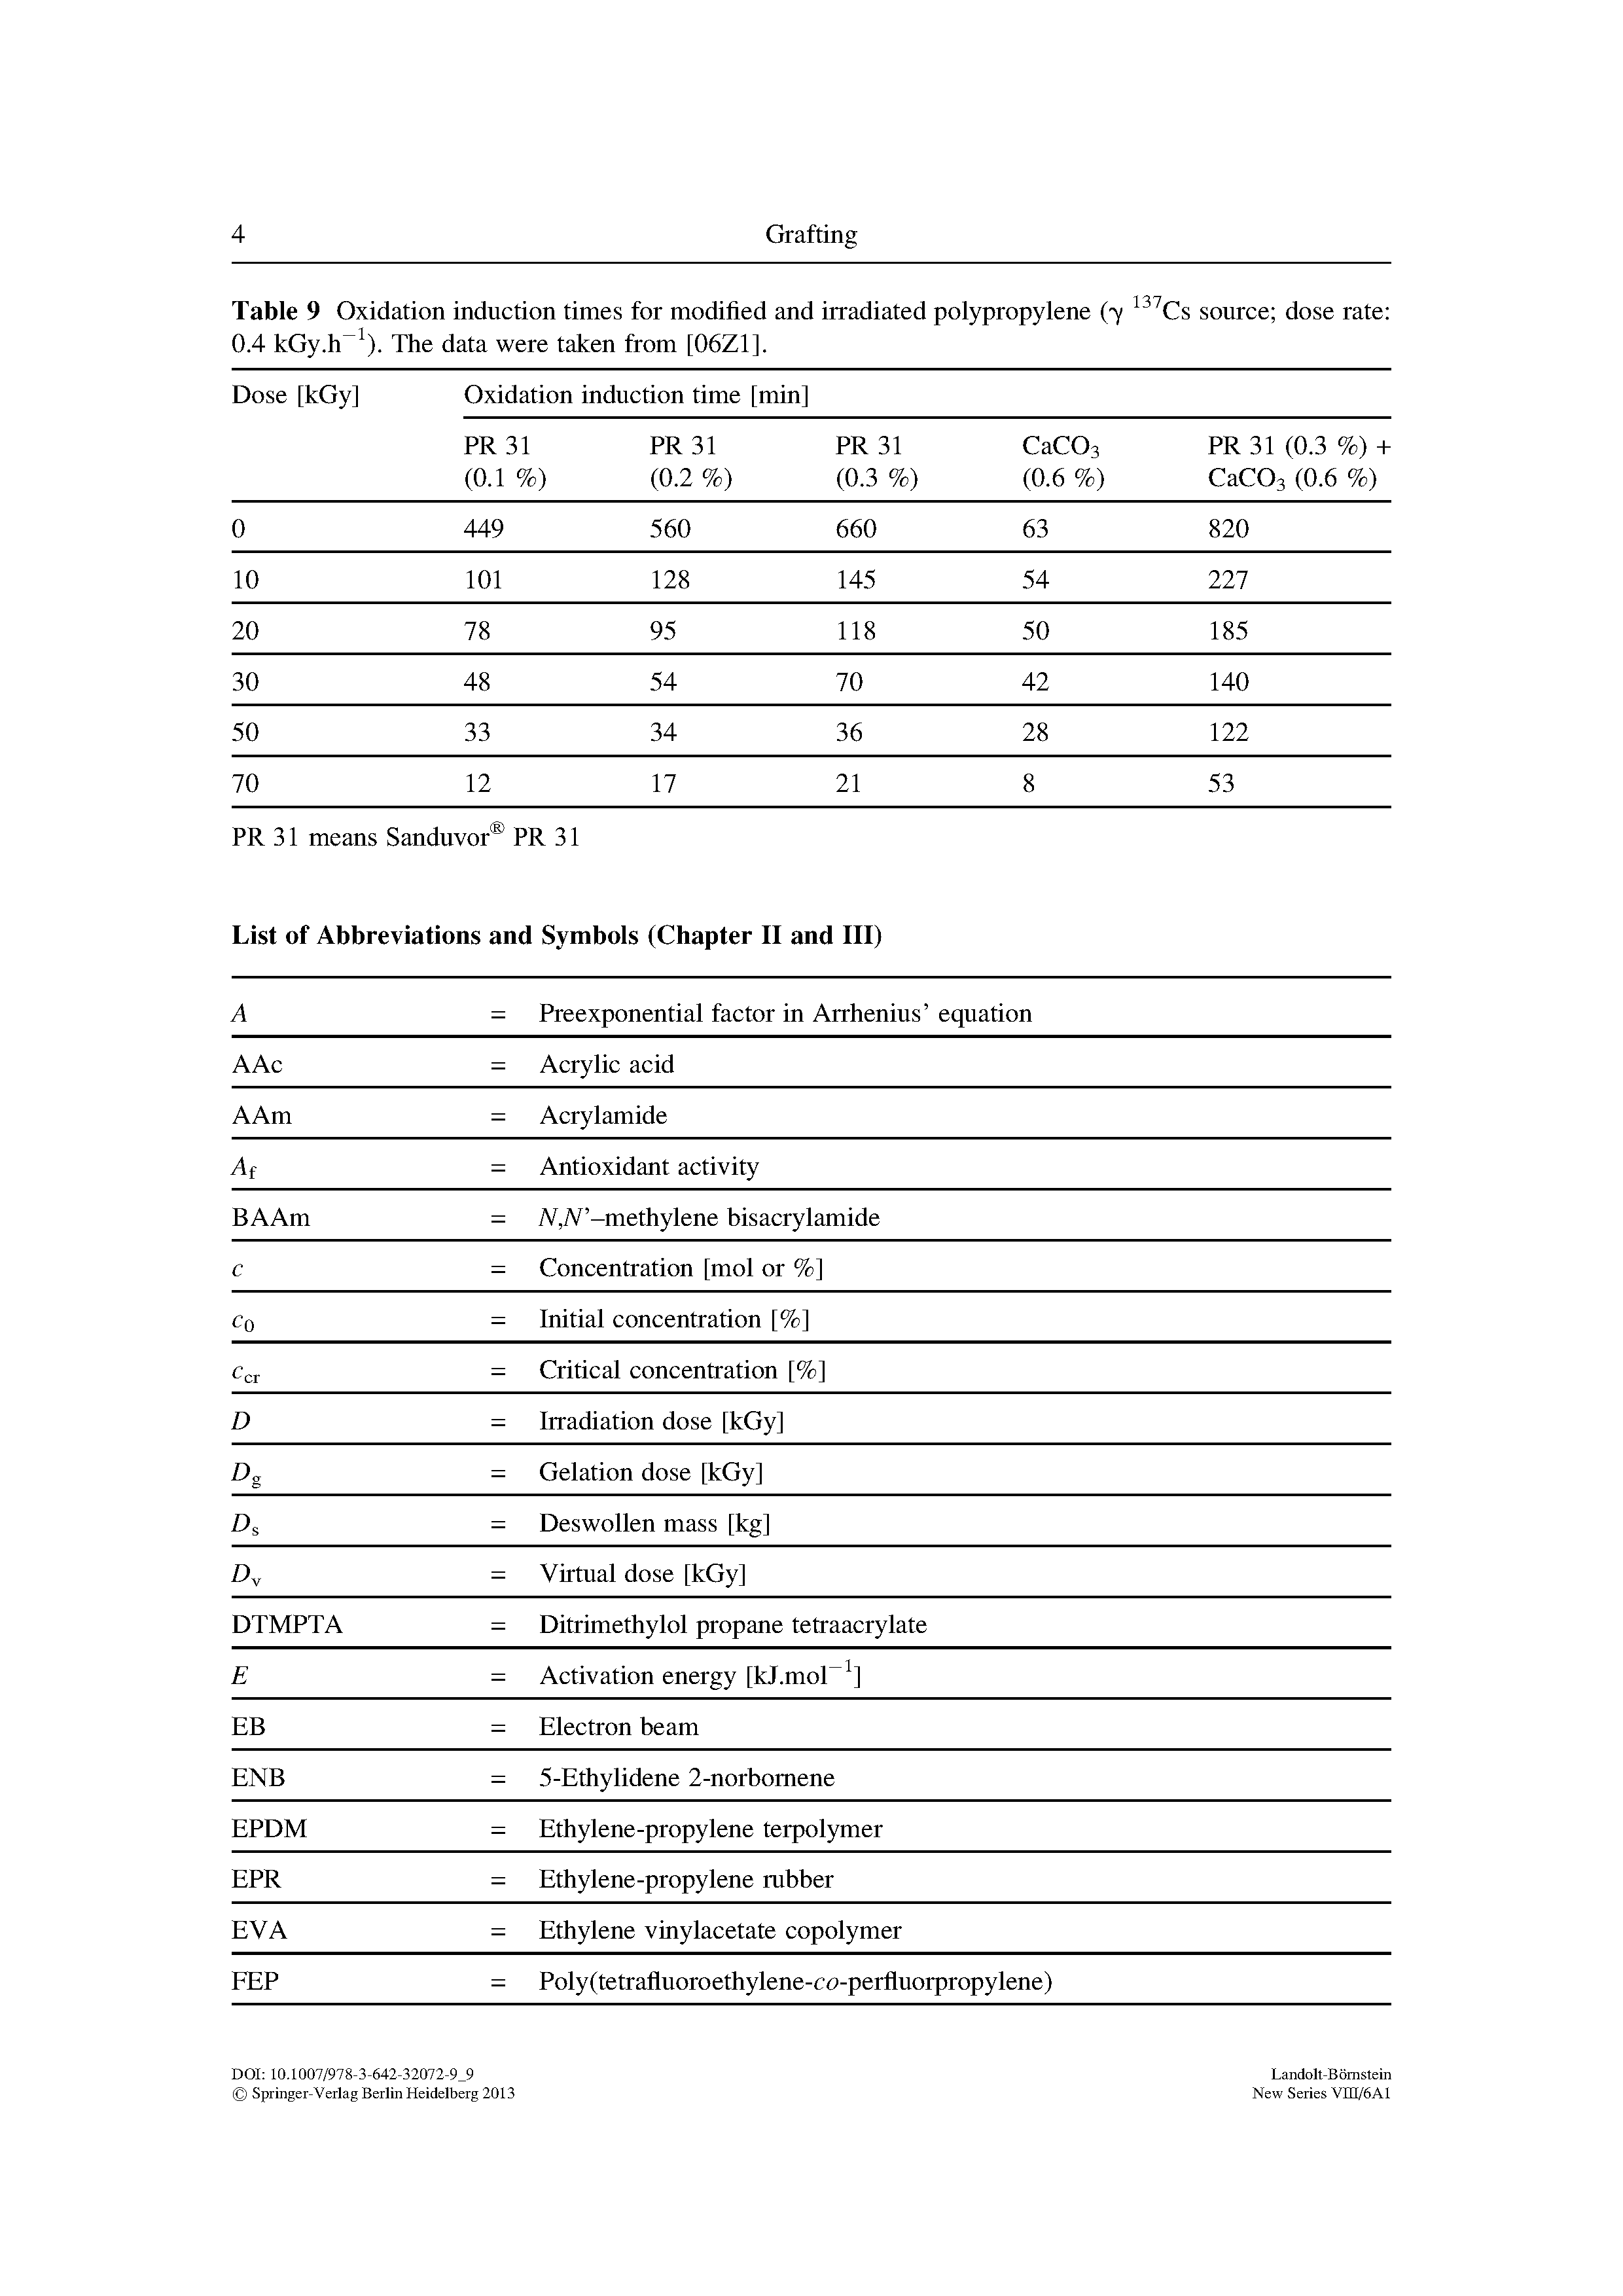 Table 9 Oxidation induction times for modified and irradiated polypropylene (7 Cs source dose rate 0.4 kGy.h ). The data were taken from [06Z1]. ...